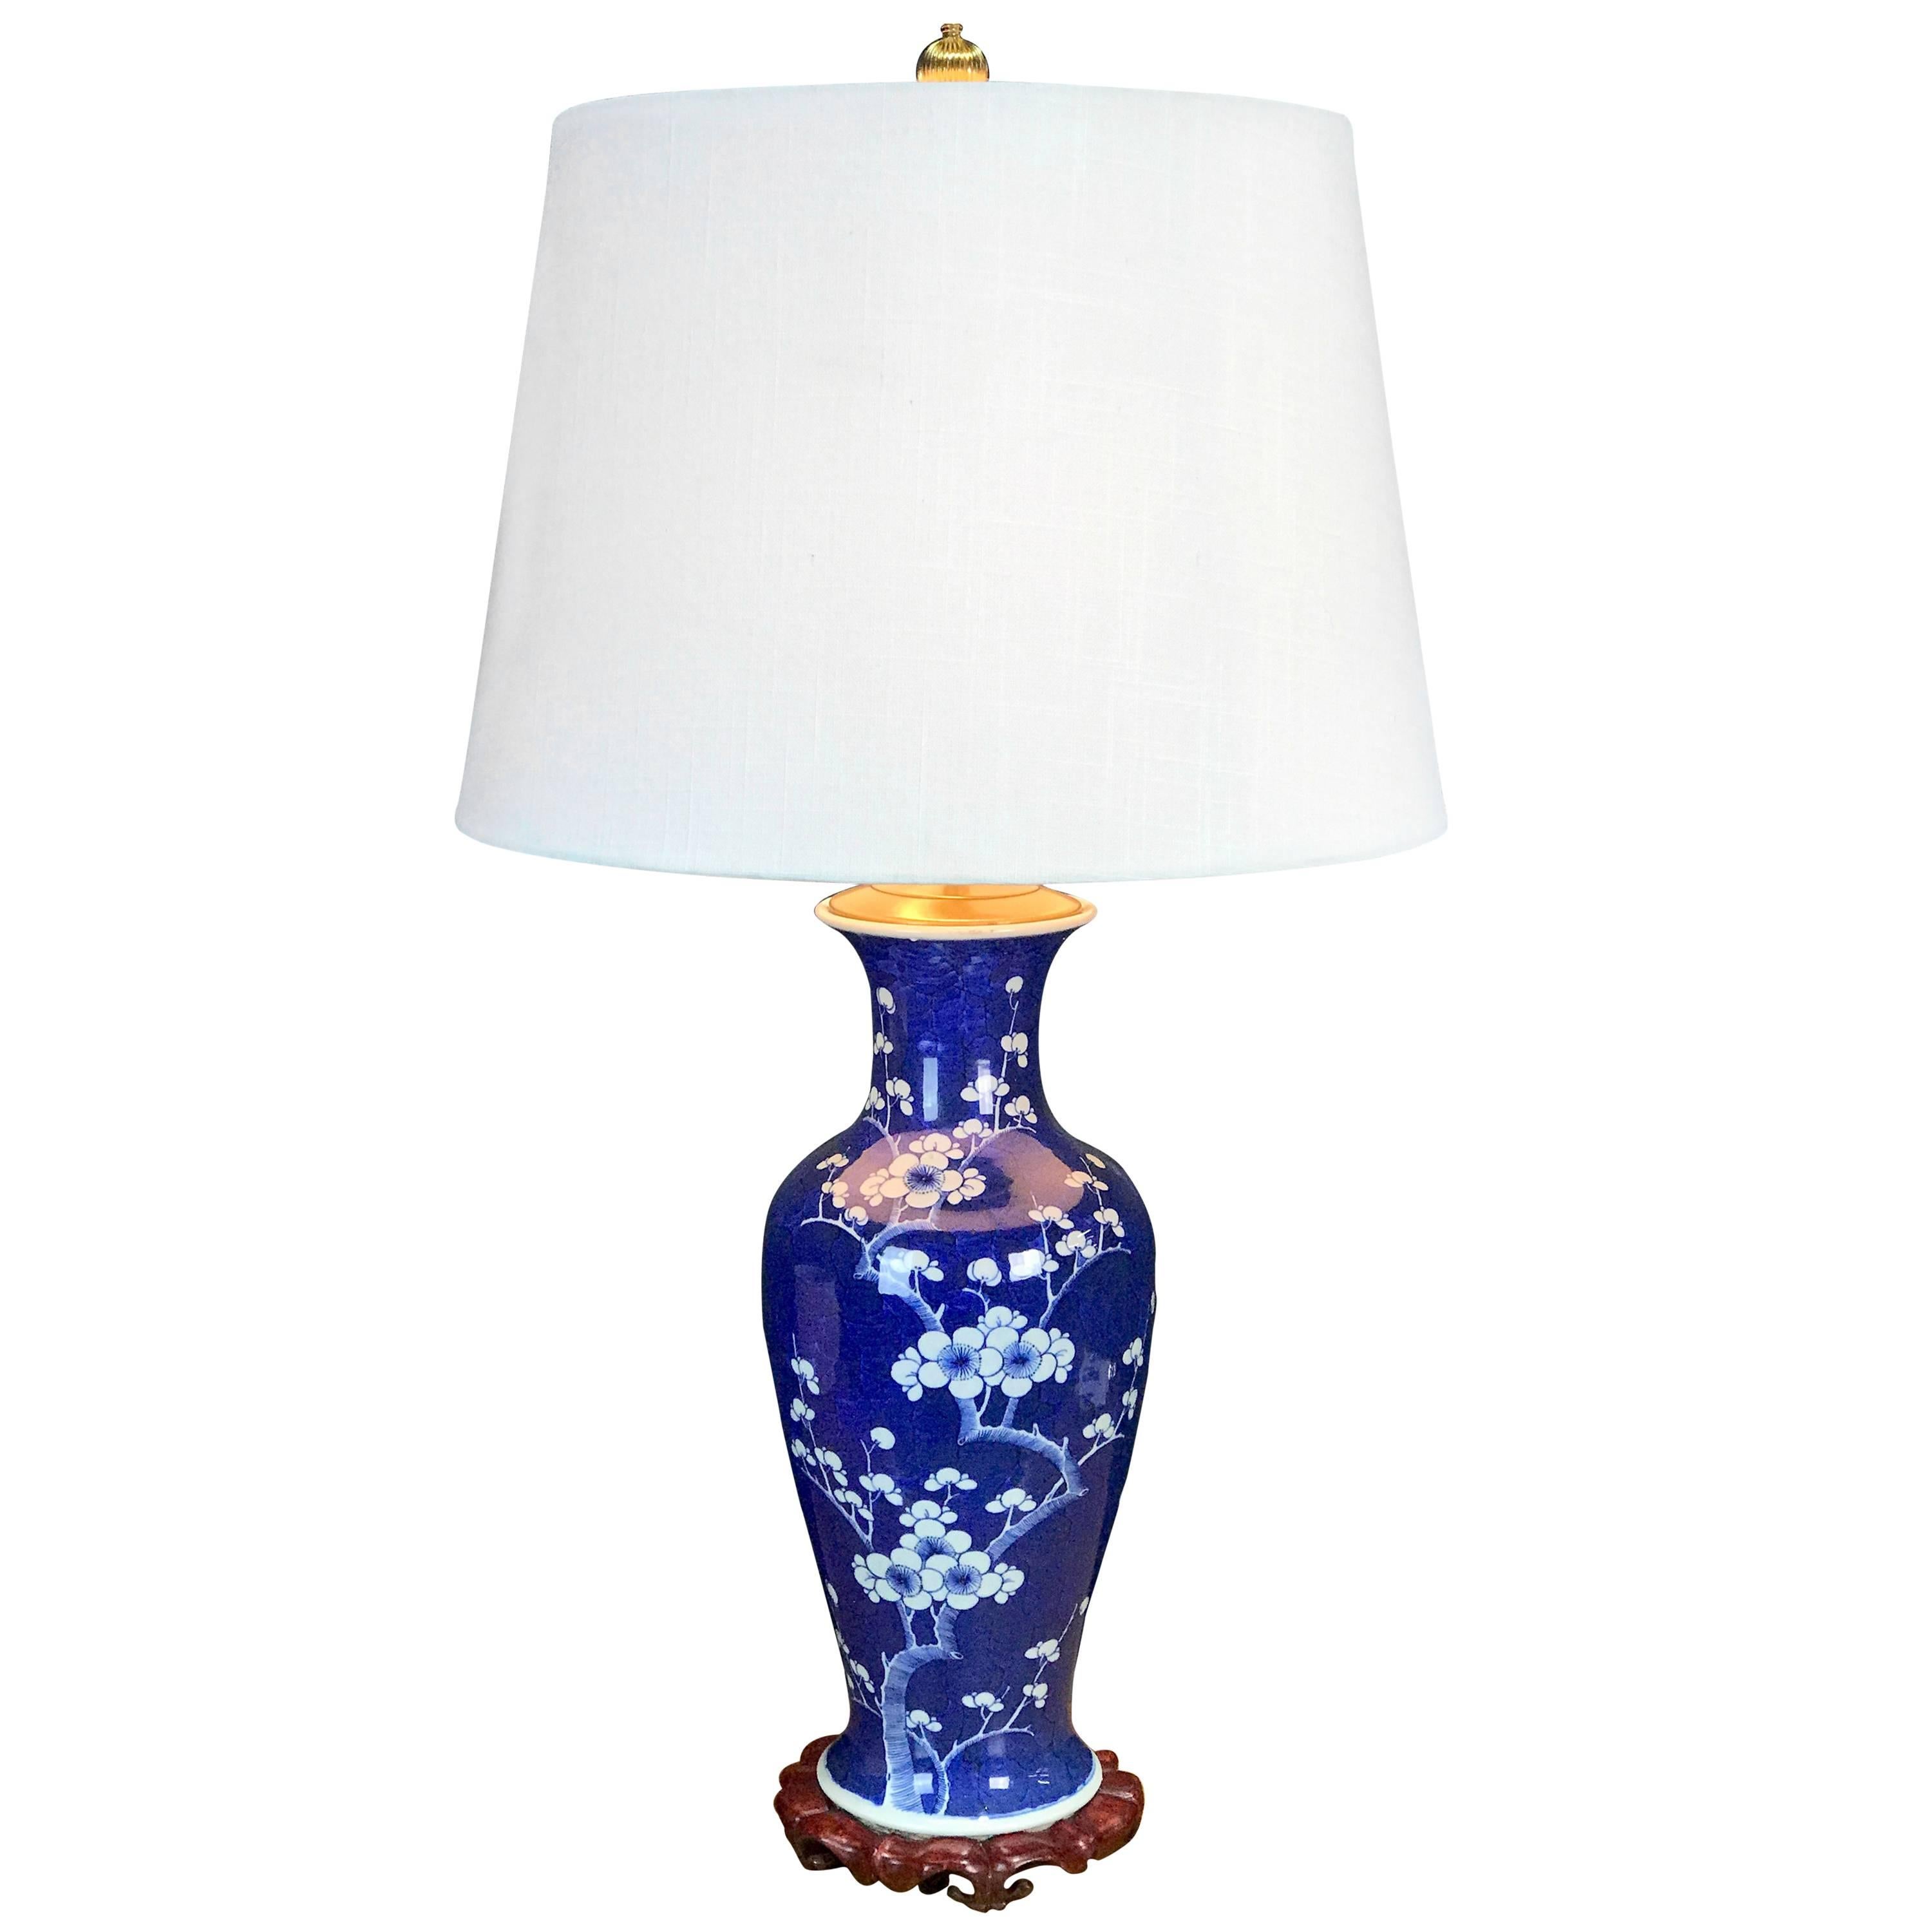 Chinese Export Prunus Vase, Now as a Lamp